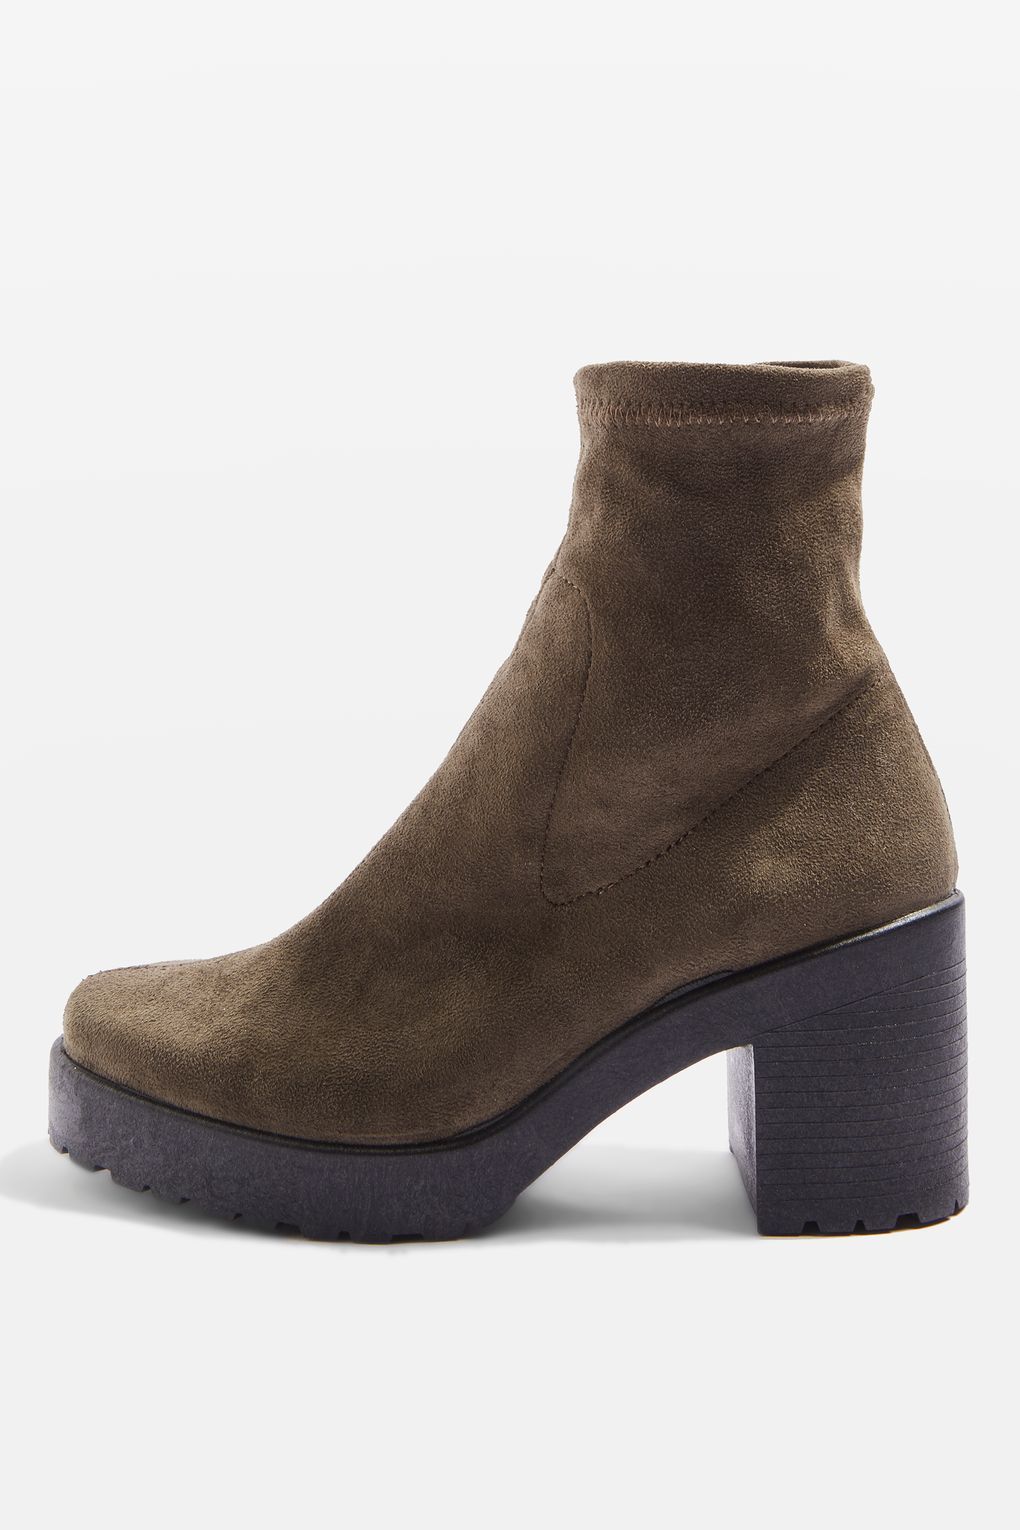 these platform boots will give you a few extra inches